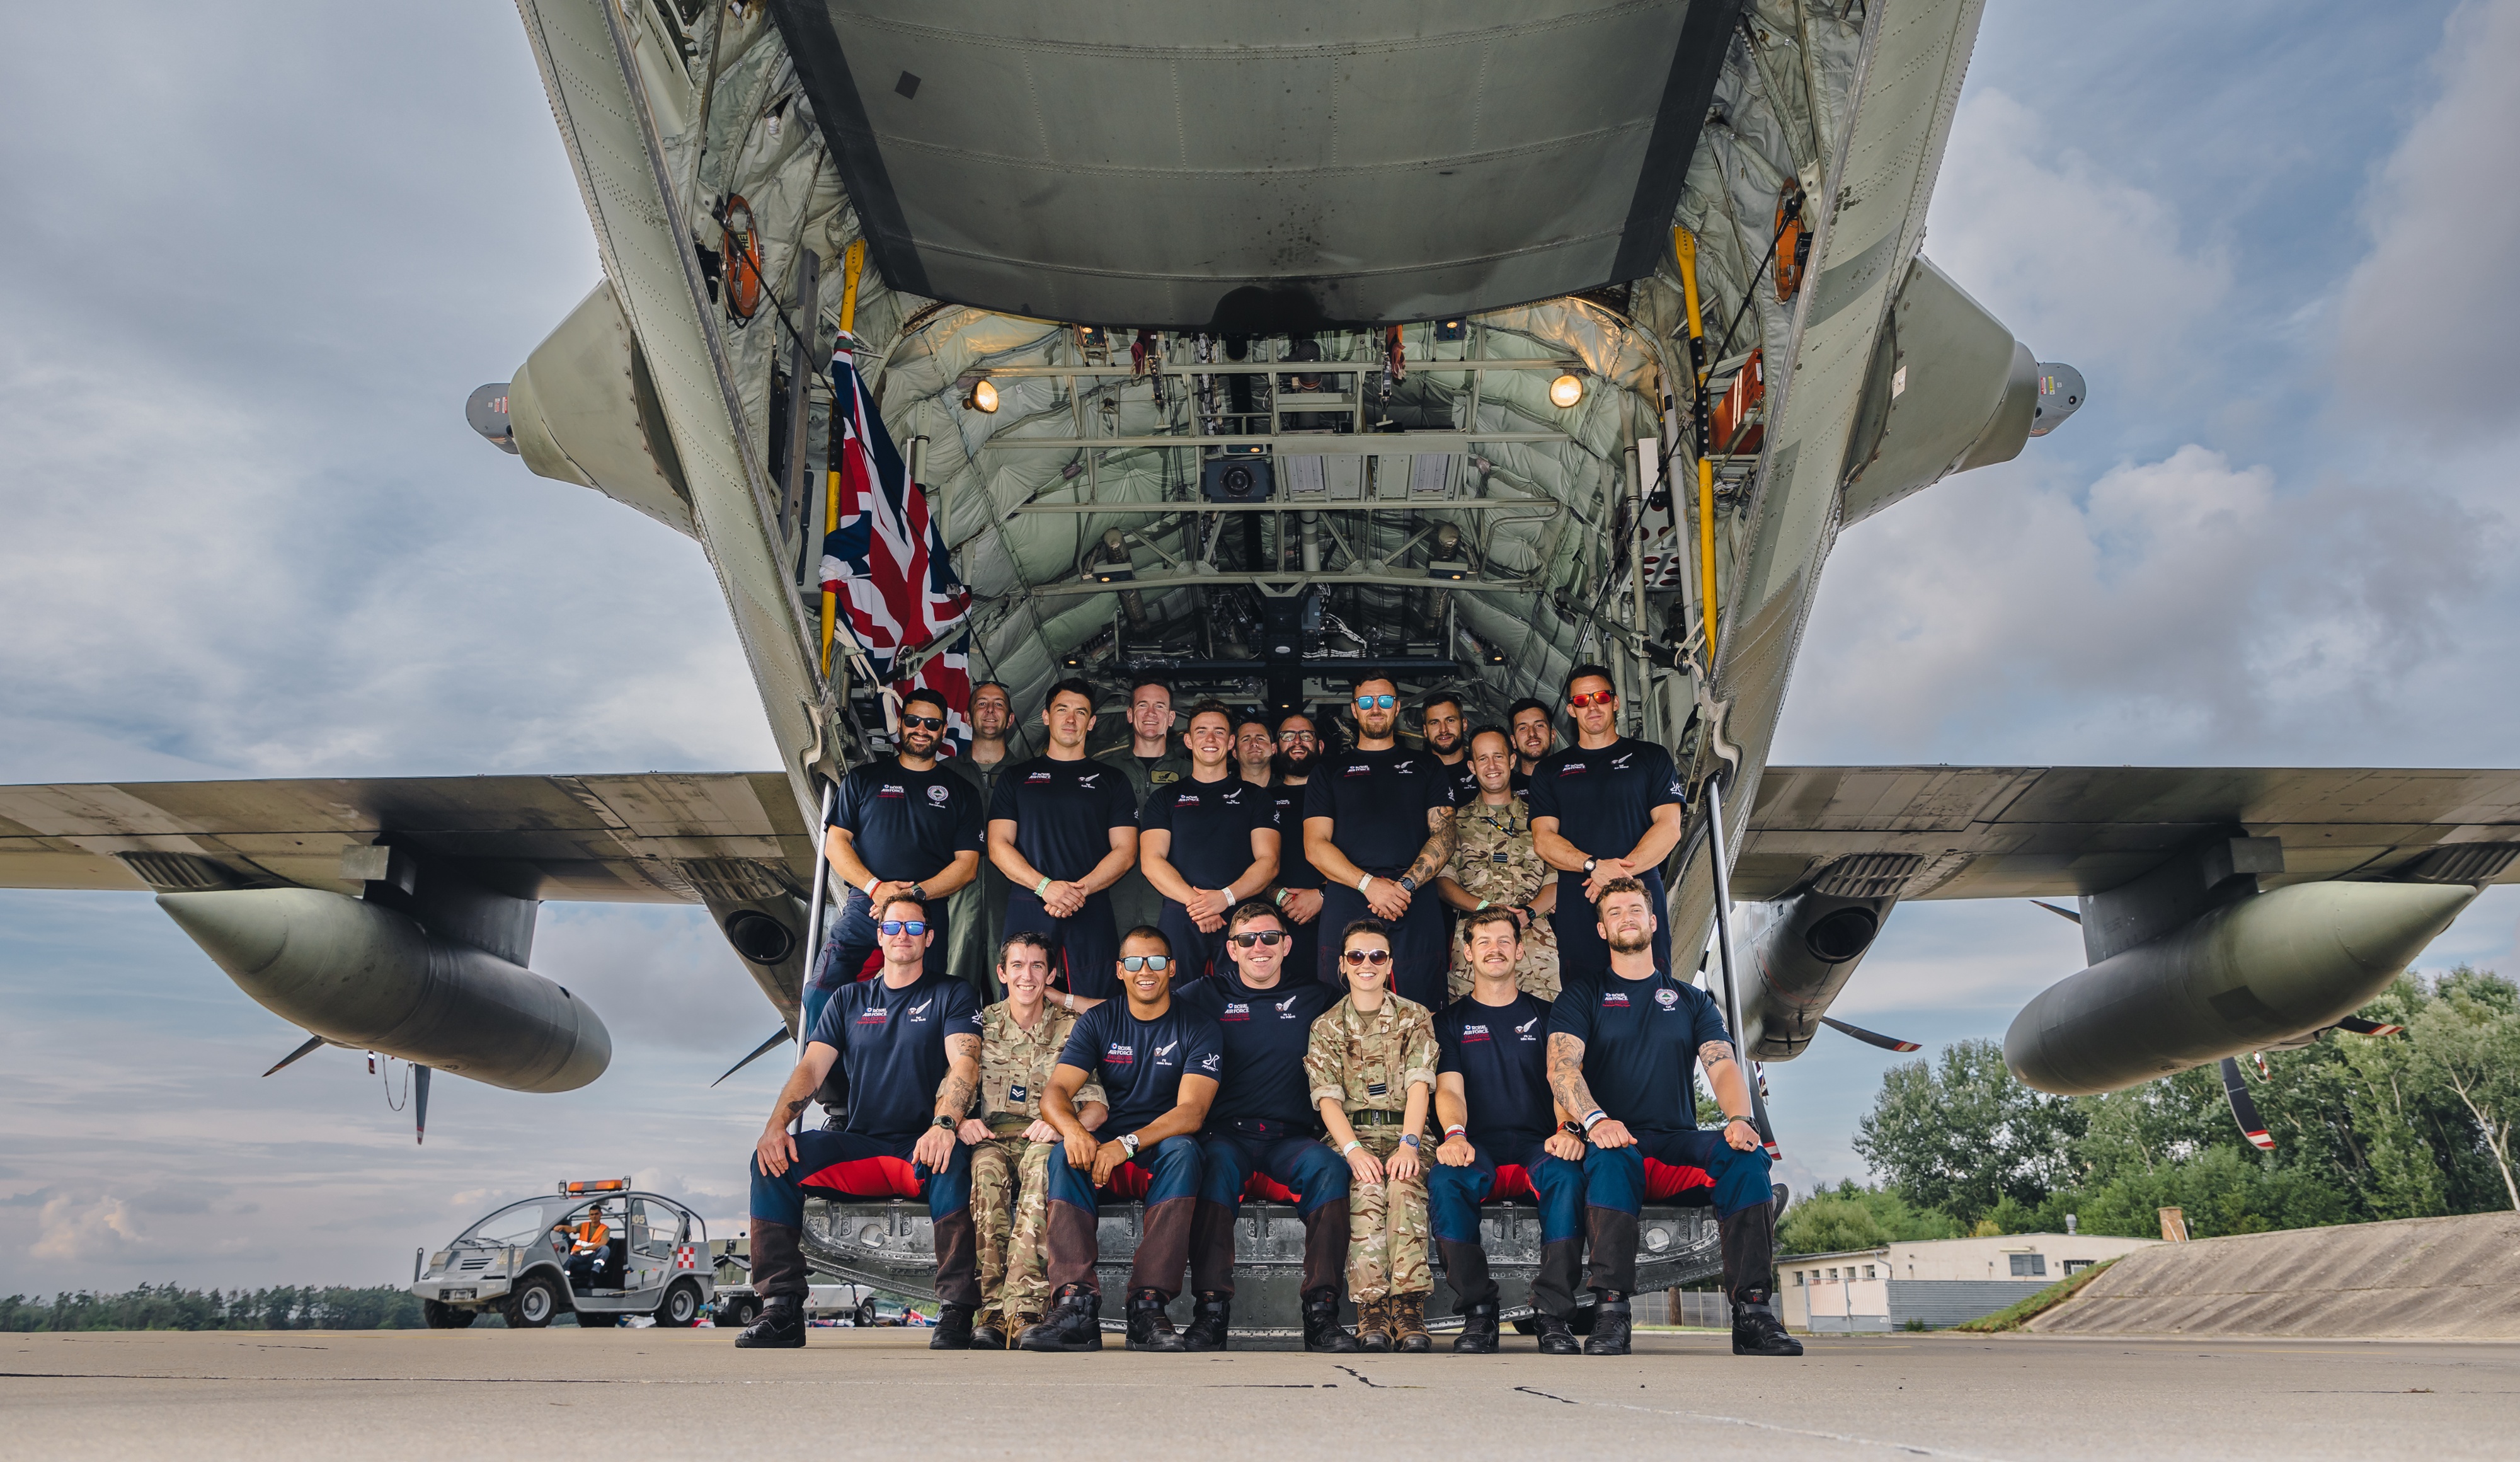 Image shows RAF aviators sitting in the loading bay of Hercules aircraft for group photo. 